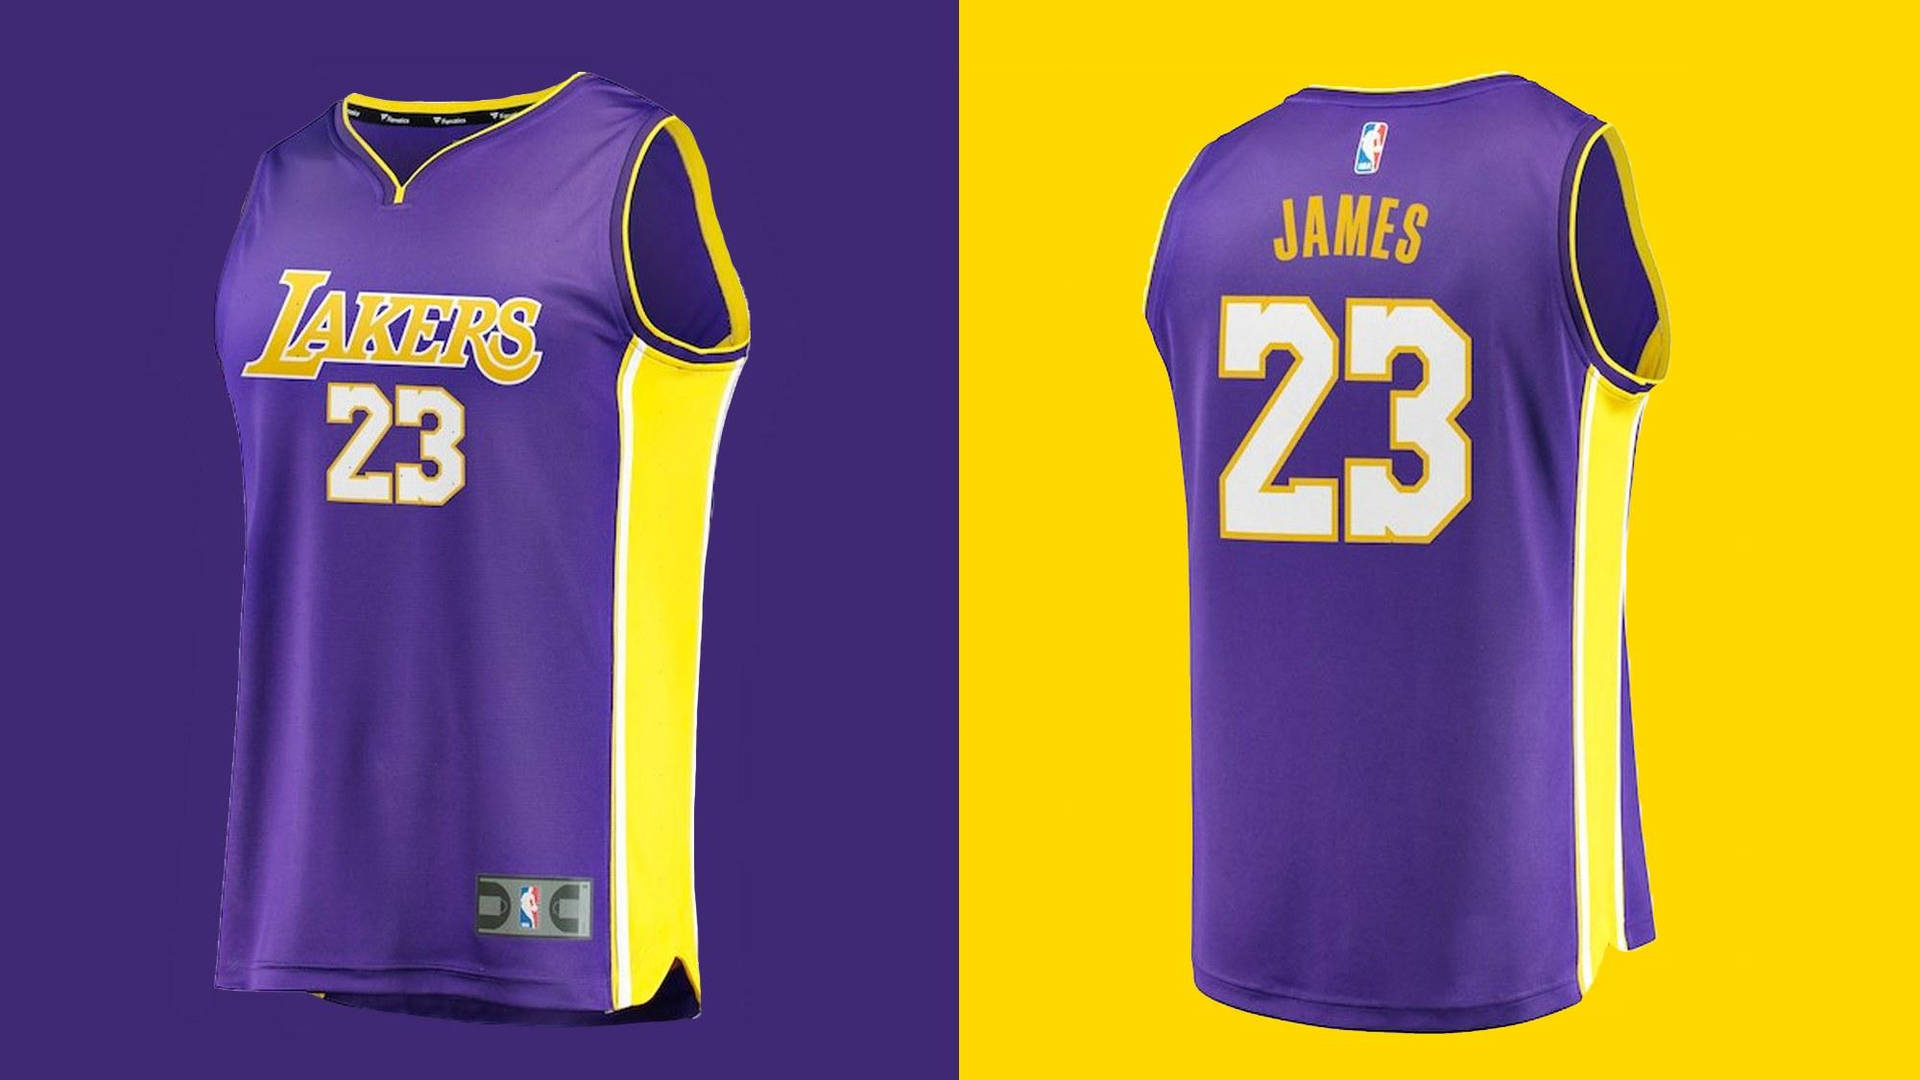 Lebron James Lakers 23 Jersey Only